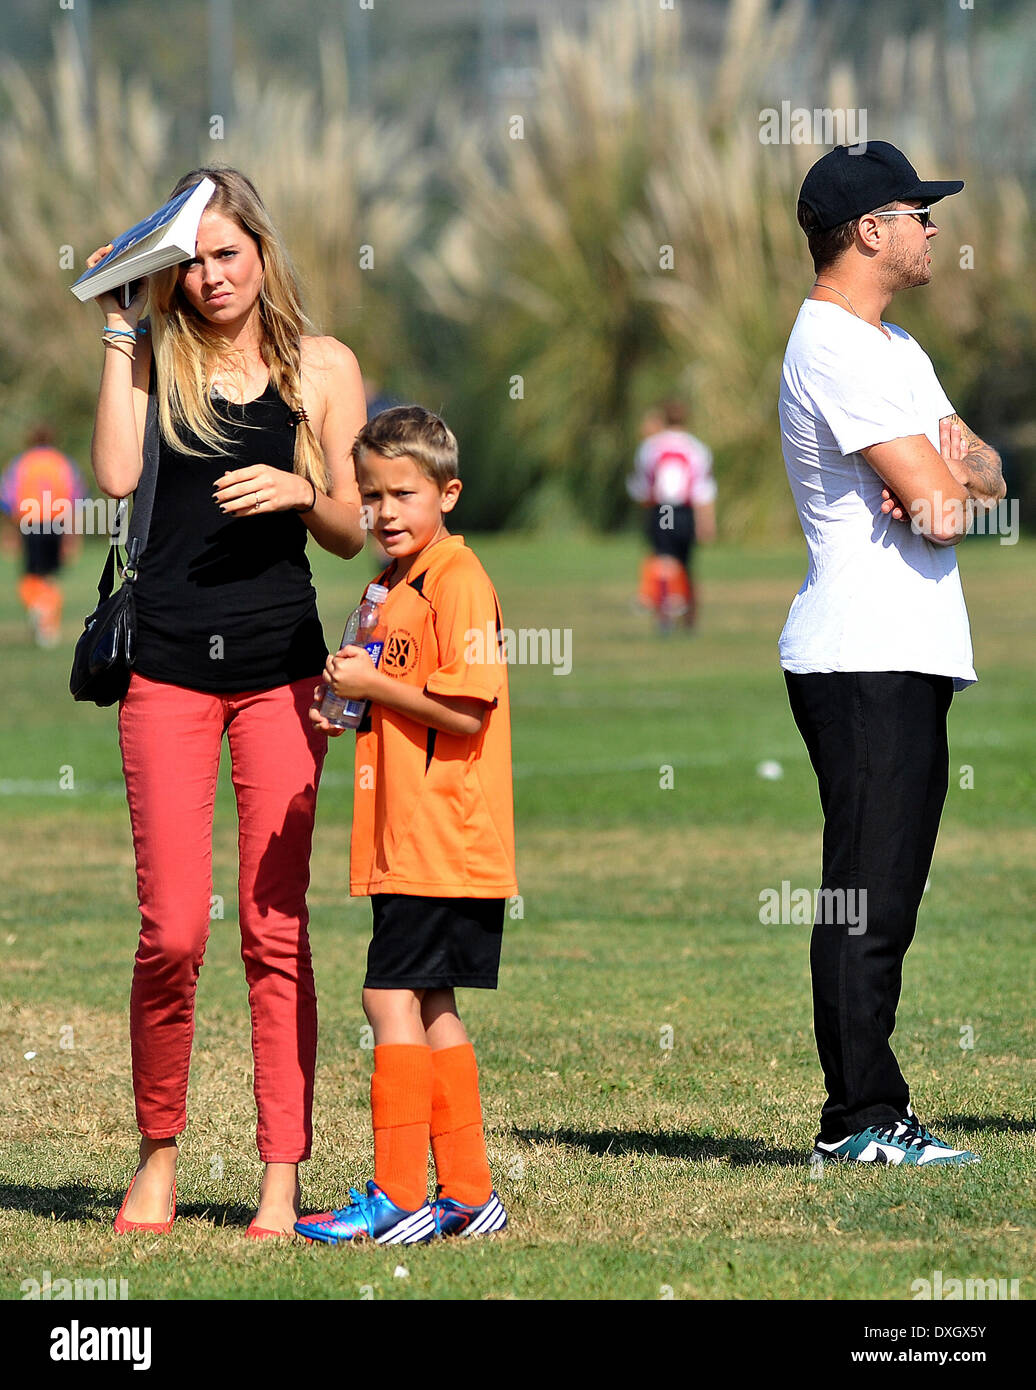 Deacon Phillippe, Paulina Slagter, Ryan Phillippe Ryan Phillippe at a park in Brentwood with his girlfriend to watch his son's soccer game Los Angeles, California - 03.11.12 Featuring: Deacon Phillippe,Paulina Slagter,Ryan Phillippe When: 03 Nov 2012 Stock Photo